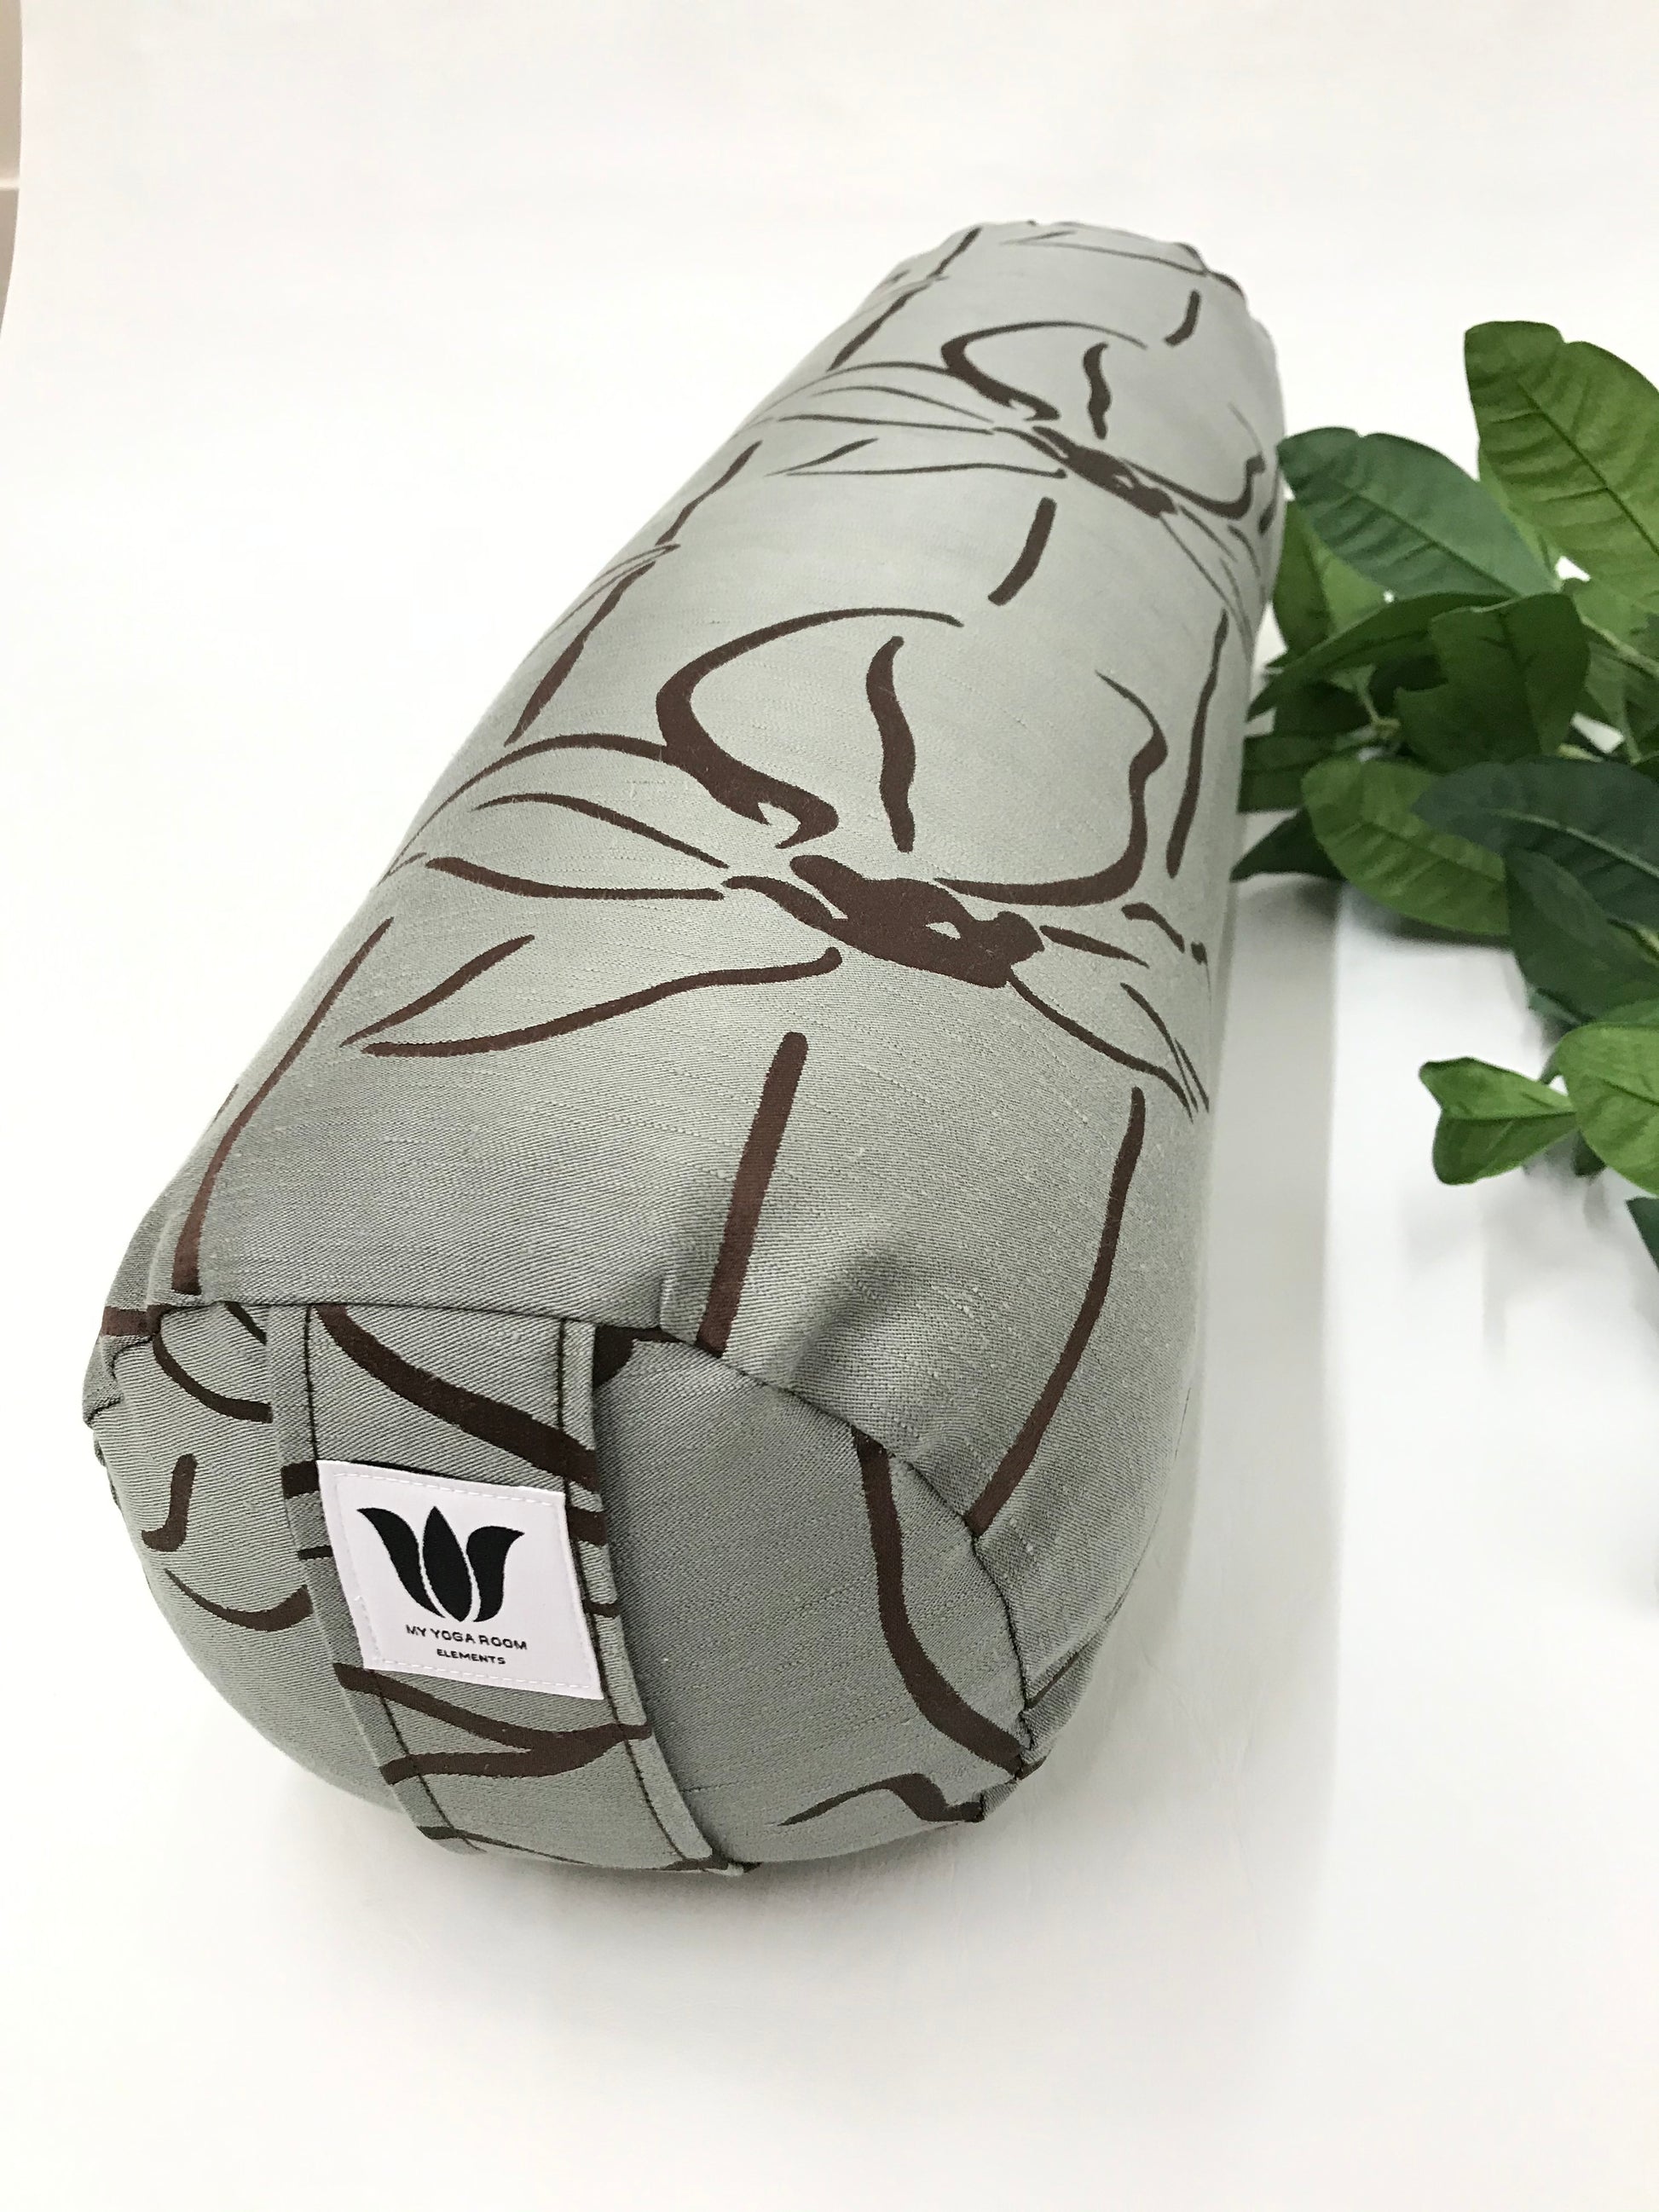 Round yoga bolster in textured linen fabric, line floral graphic in sage and brown fabric. Allergy conscious fill with removeable cover. Made in Canada by My Yoga Room Elements